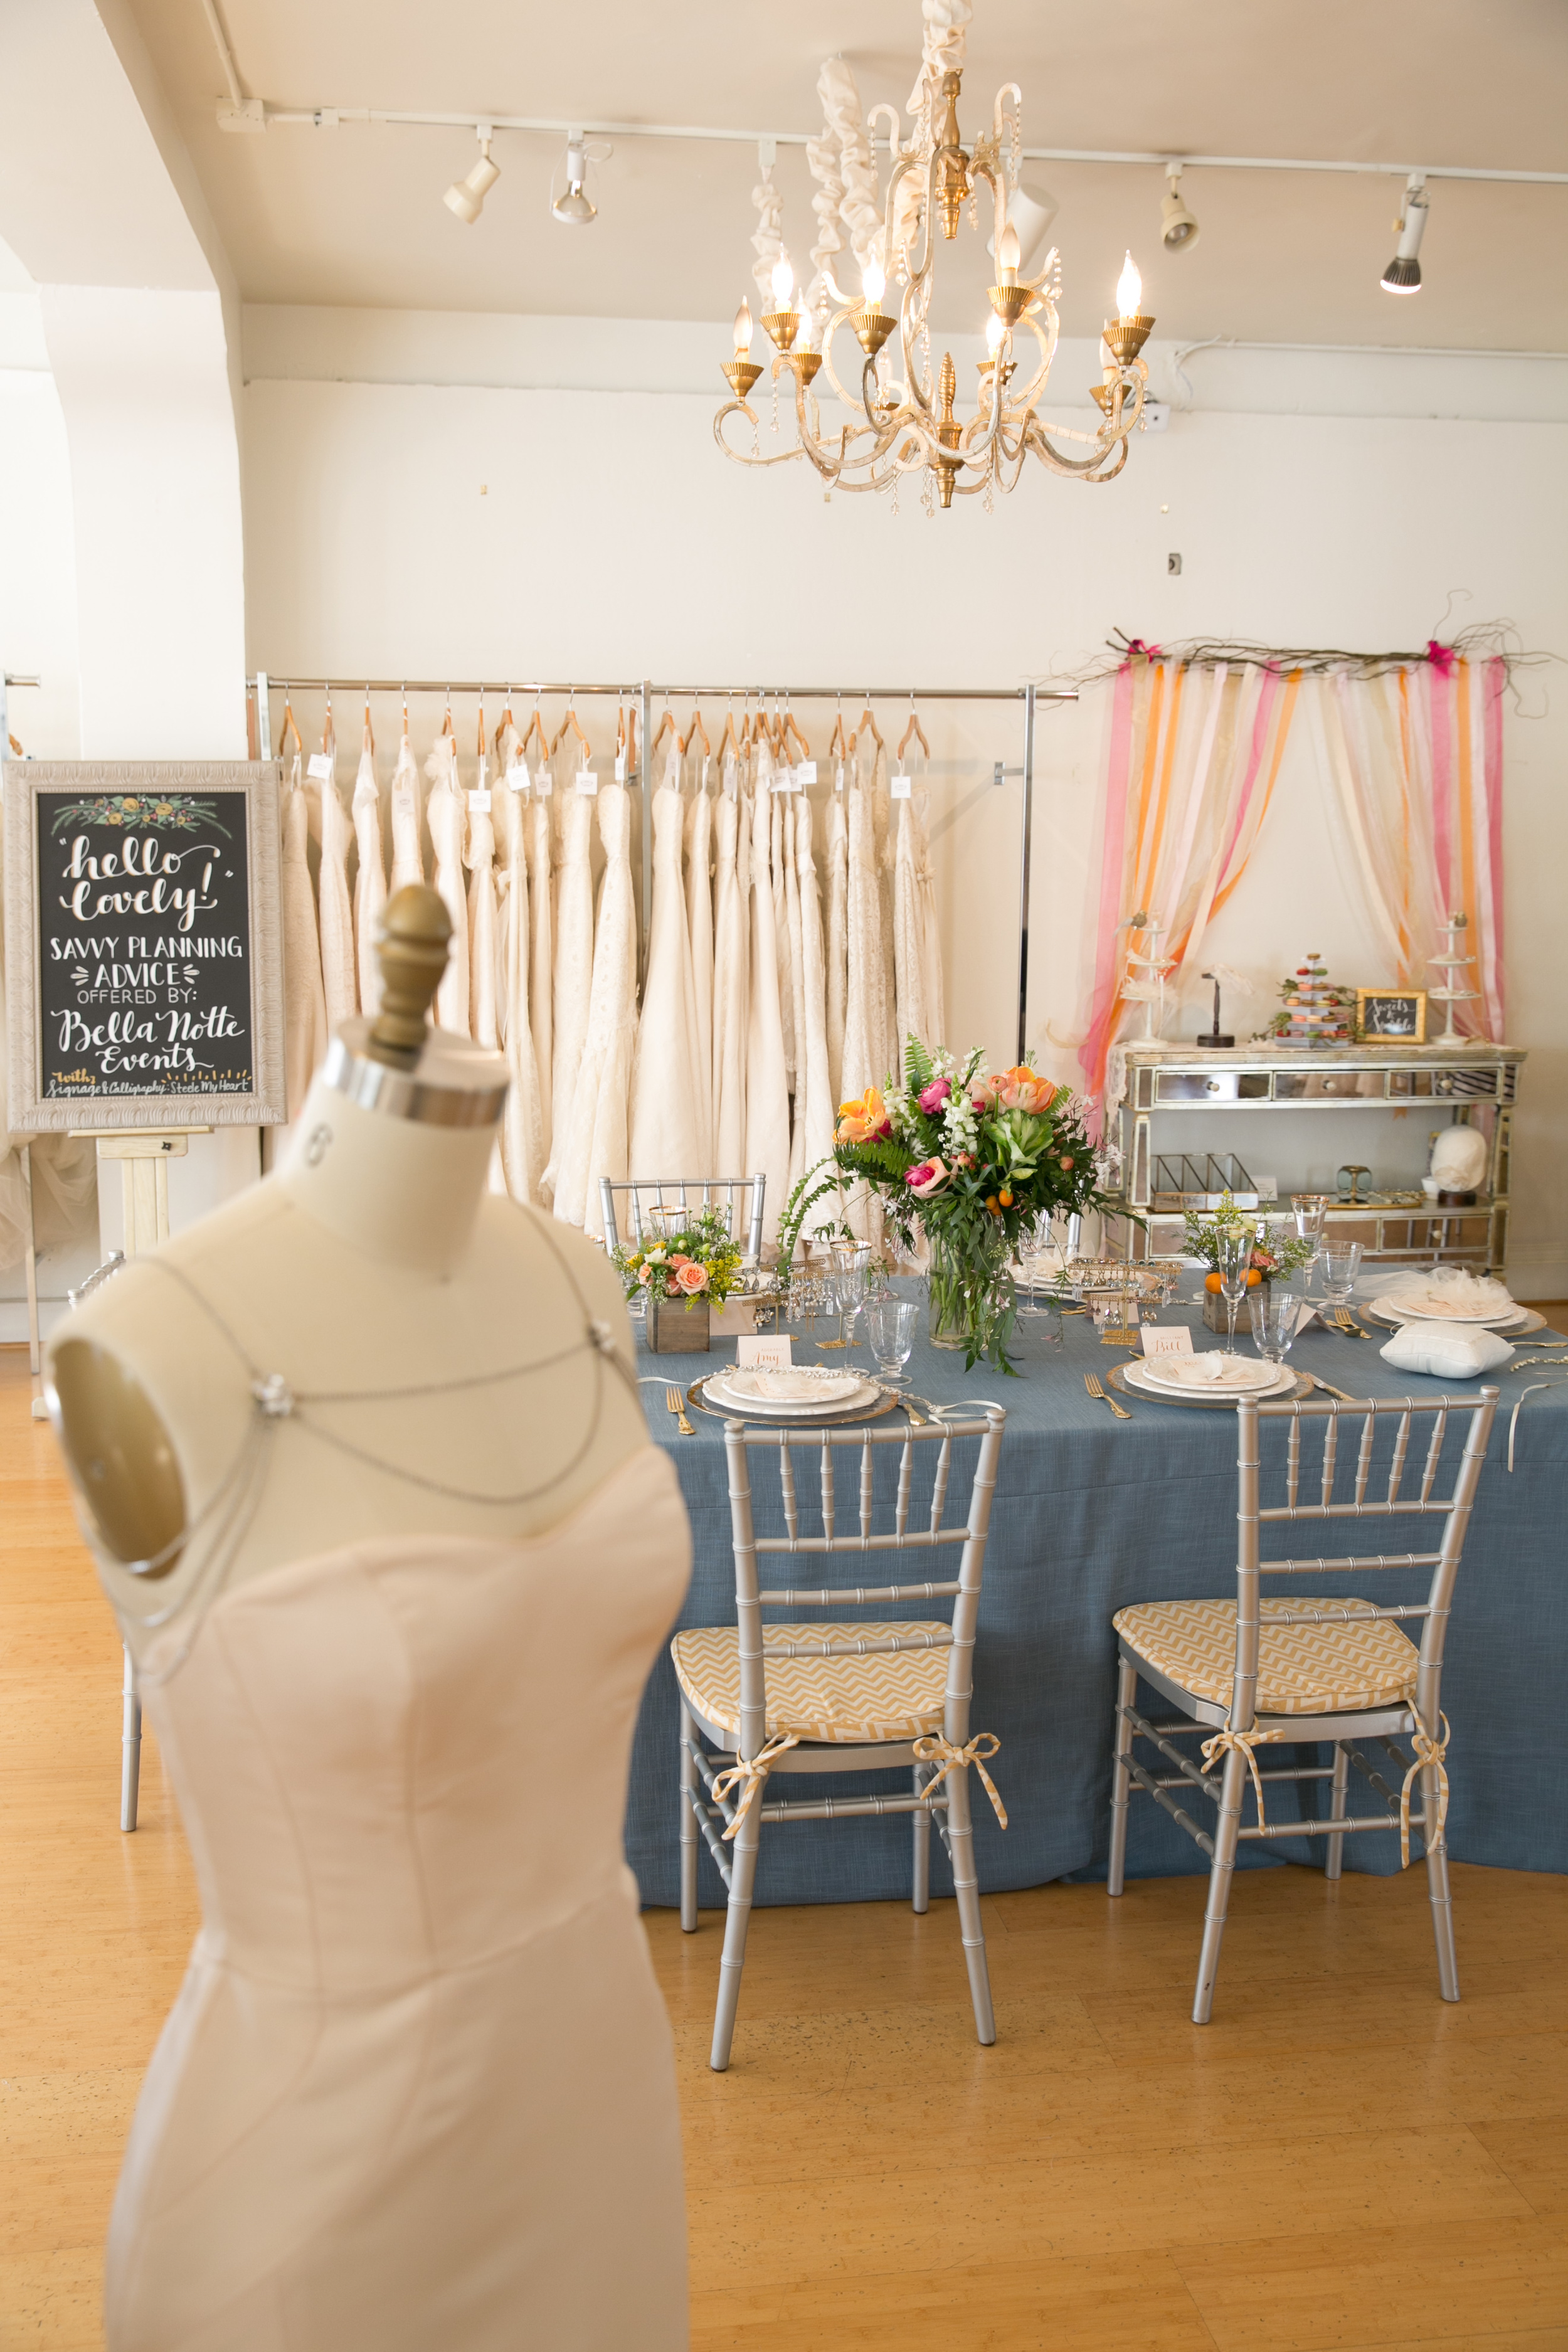 Styled Shoot at the Amy Kuschel Salon in San Francisco | Bella Notte Events | San Francisco Wedding Planning